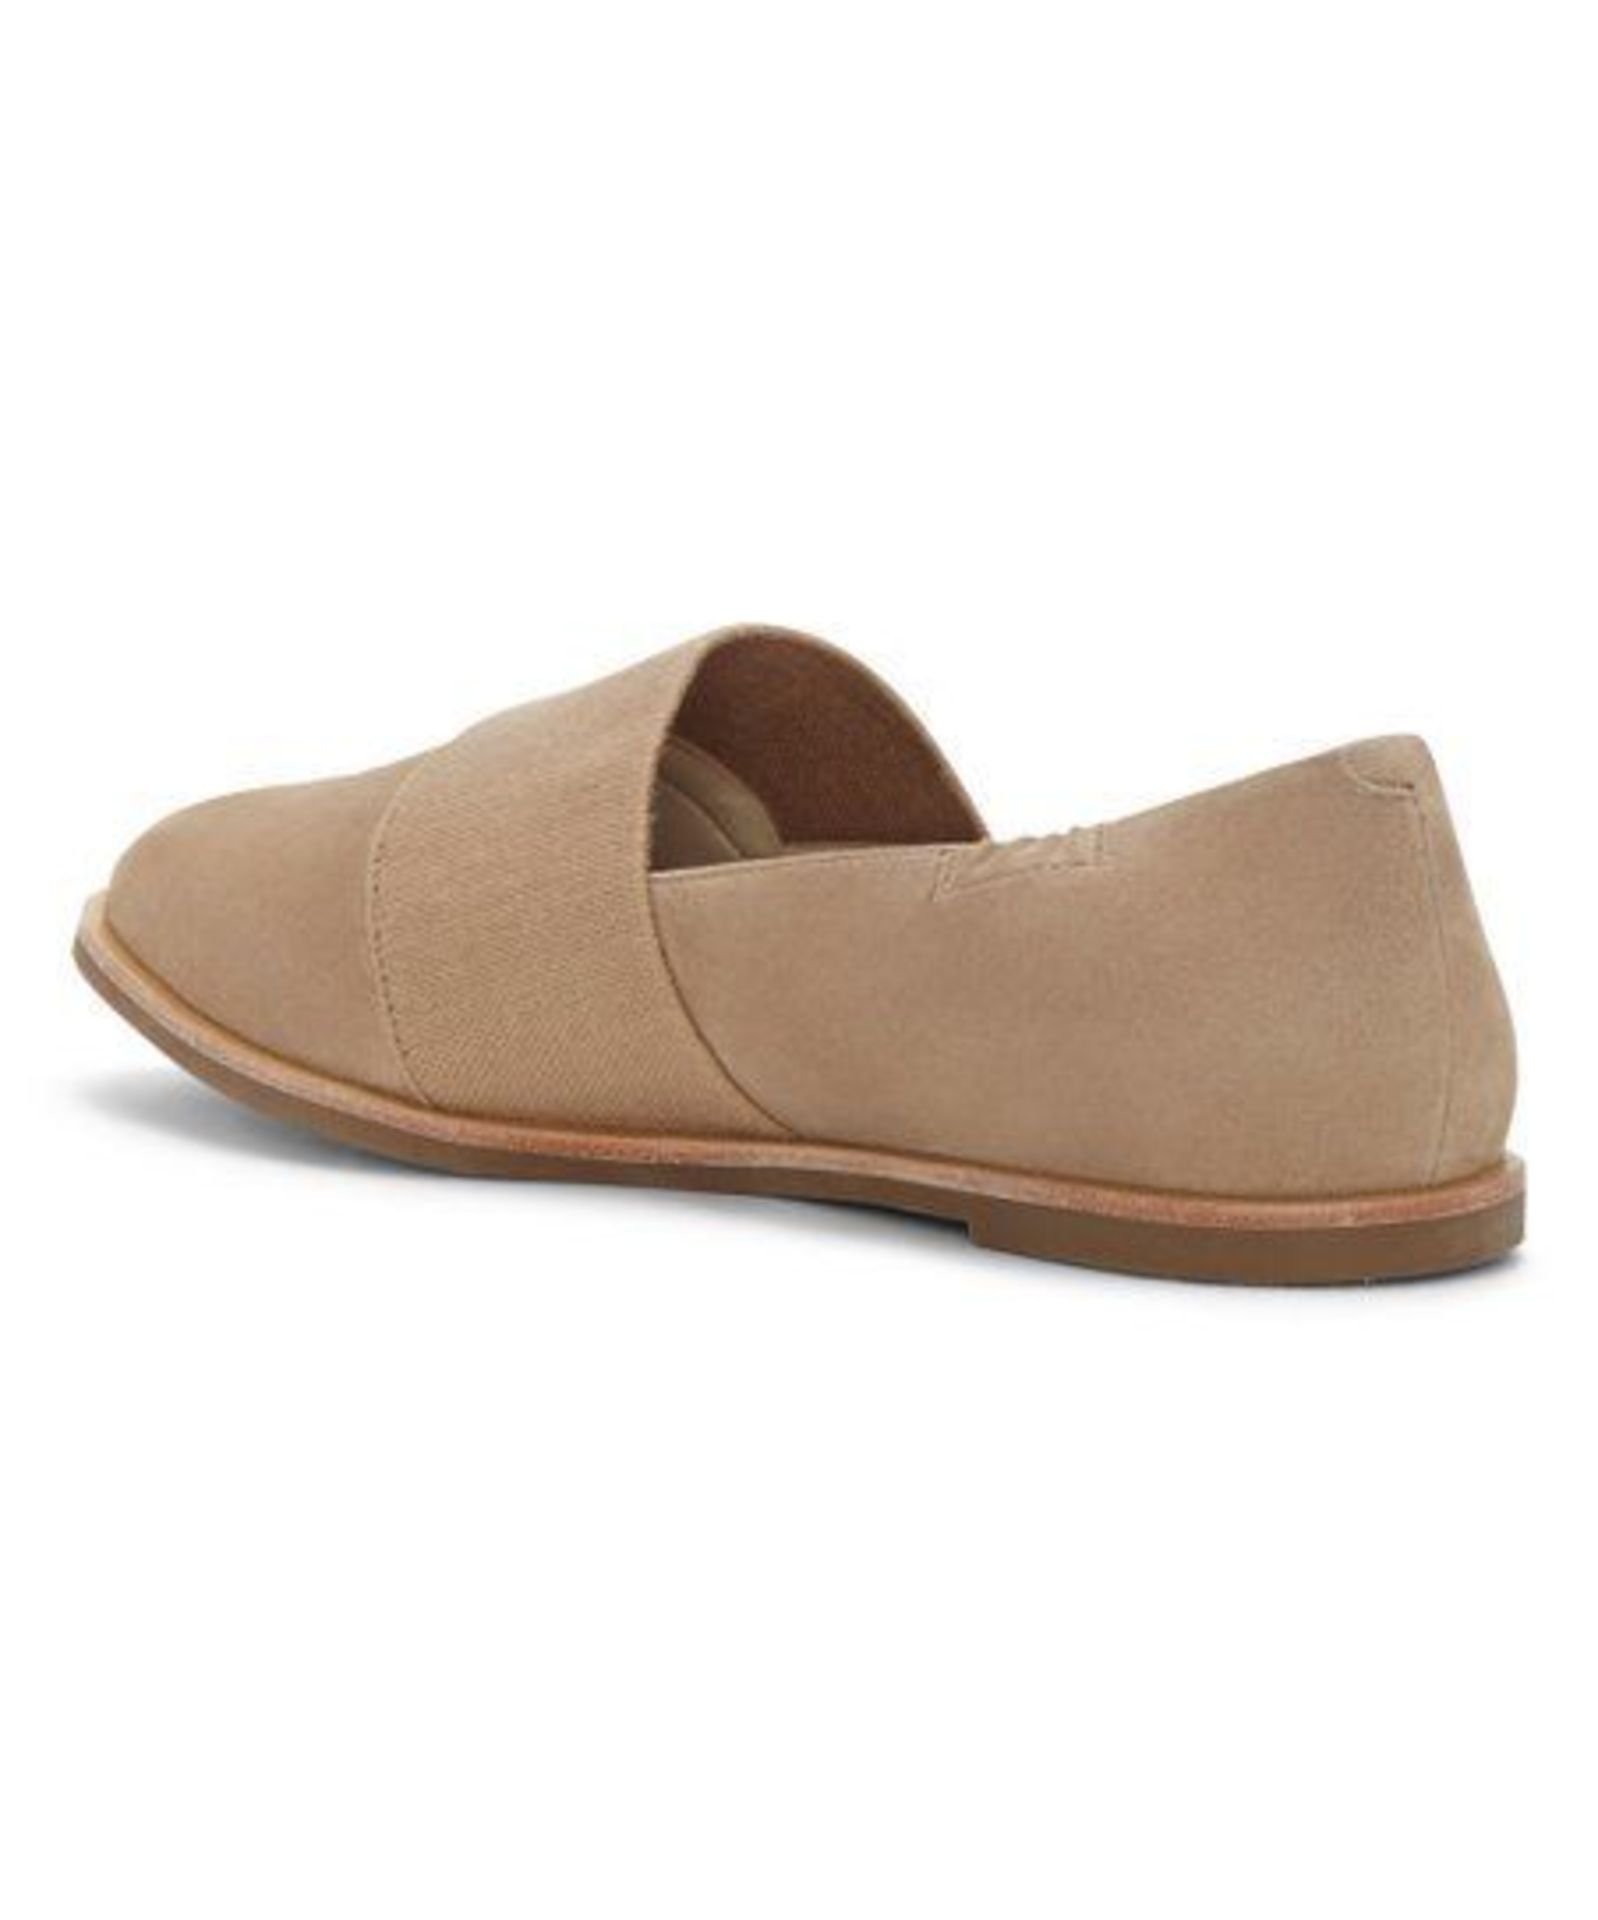 Ed By Ellen Degeneres, Sahara Karlin Leather Loafer - Women, Size Uk 4-4.5 Us 6. (New With Box) [ - Image 4 of 5